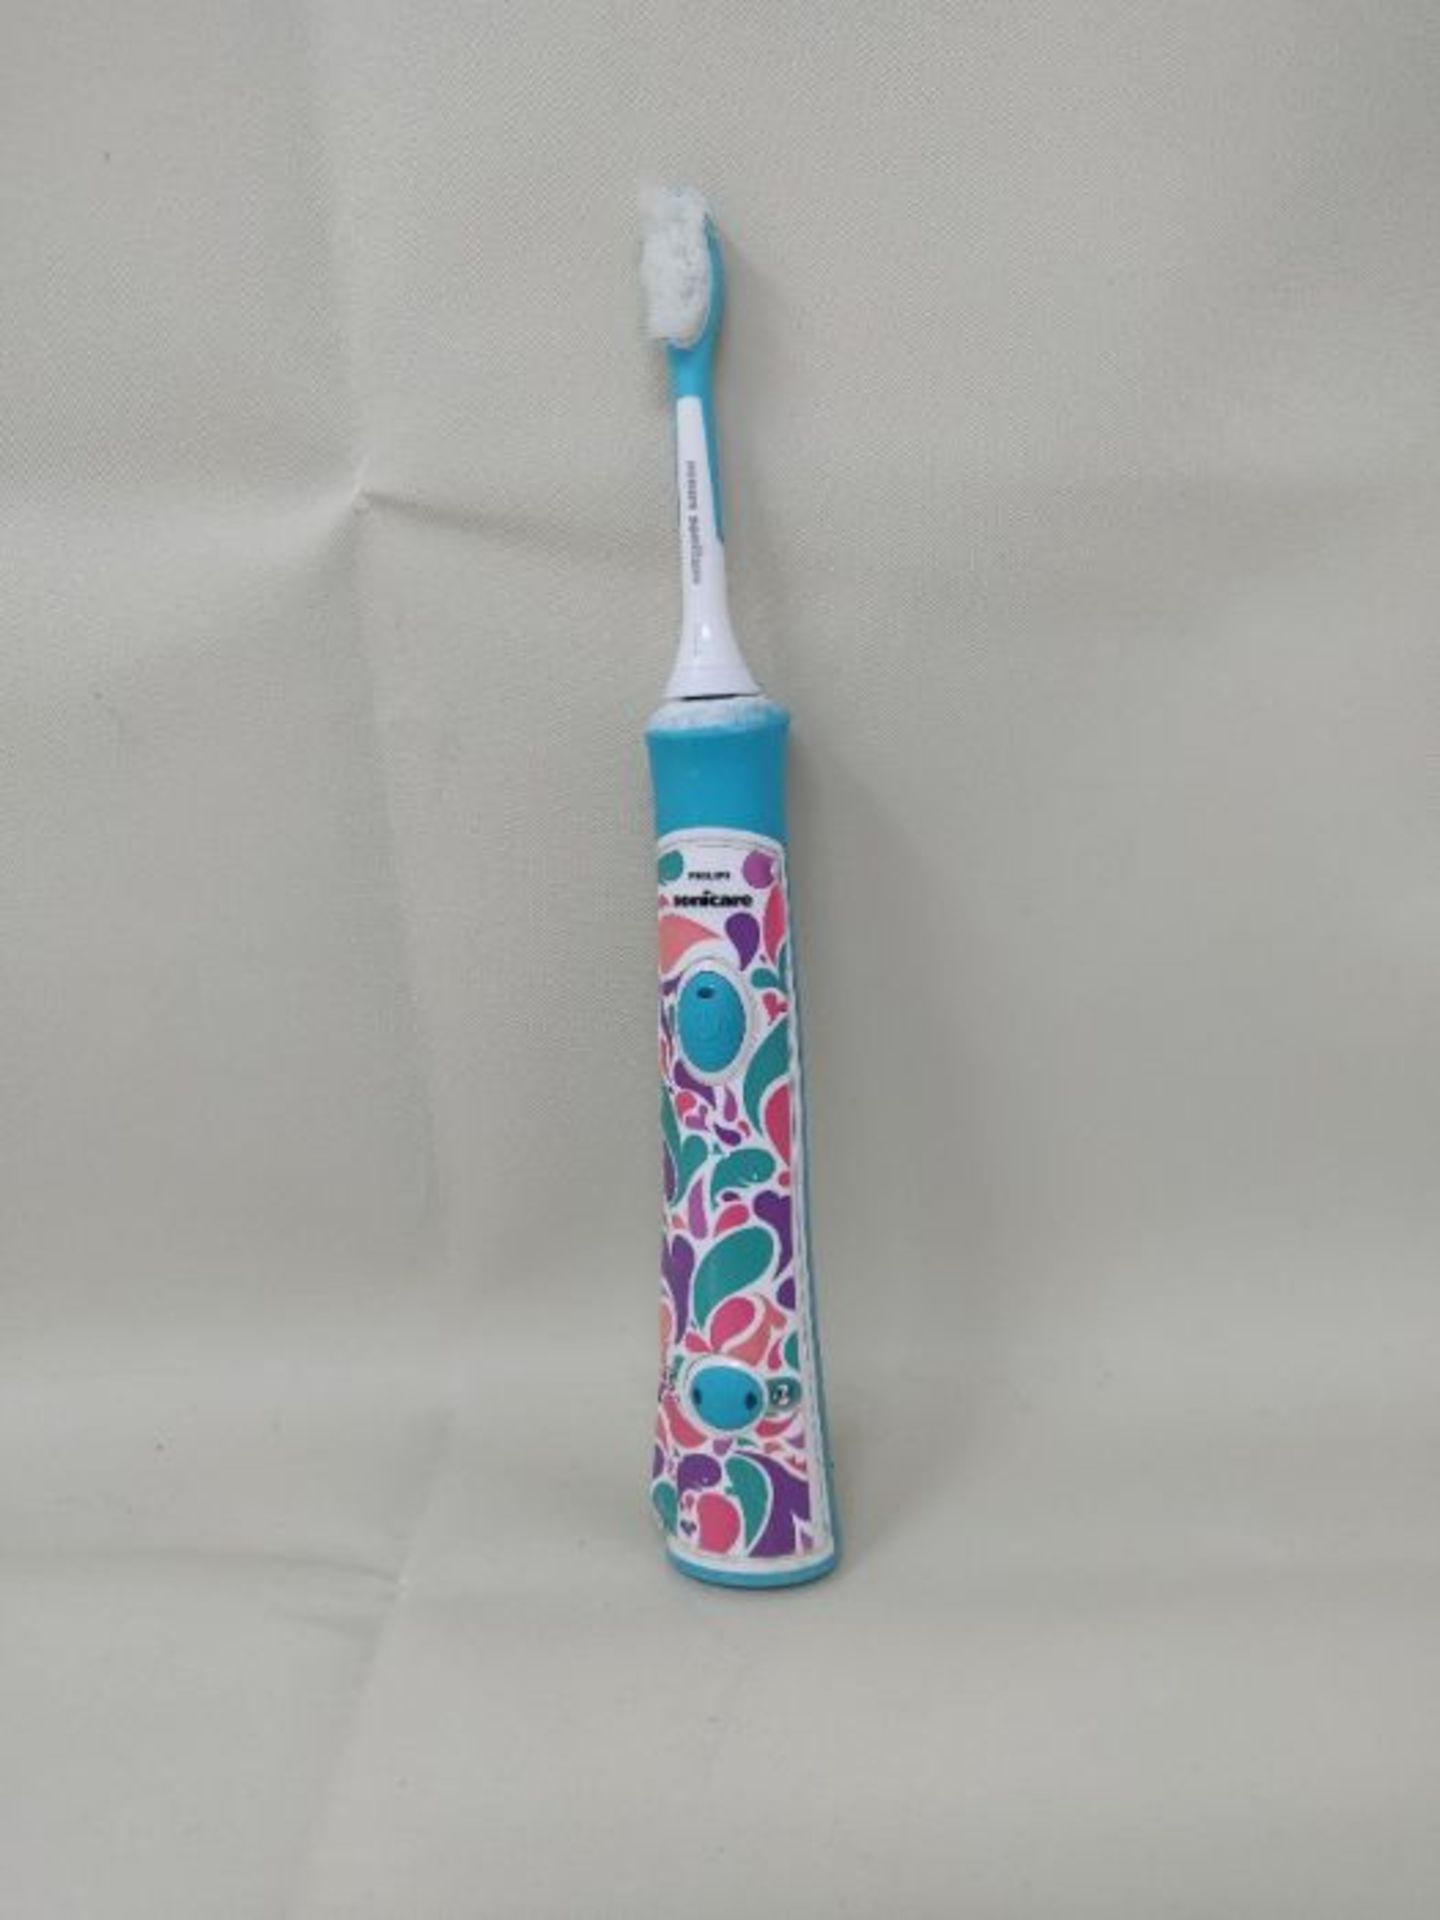 [INCOMPLETE] Philips Sonicare For Kids Electric Toothbrush with 1 Brush Head, 2 Modes - Image 2 of 2